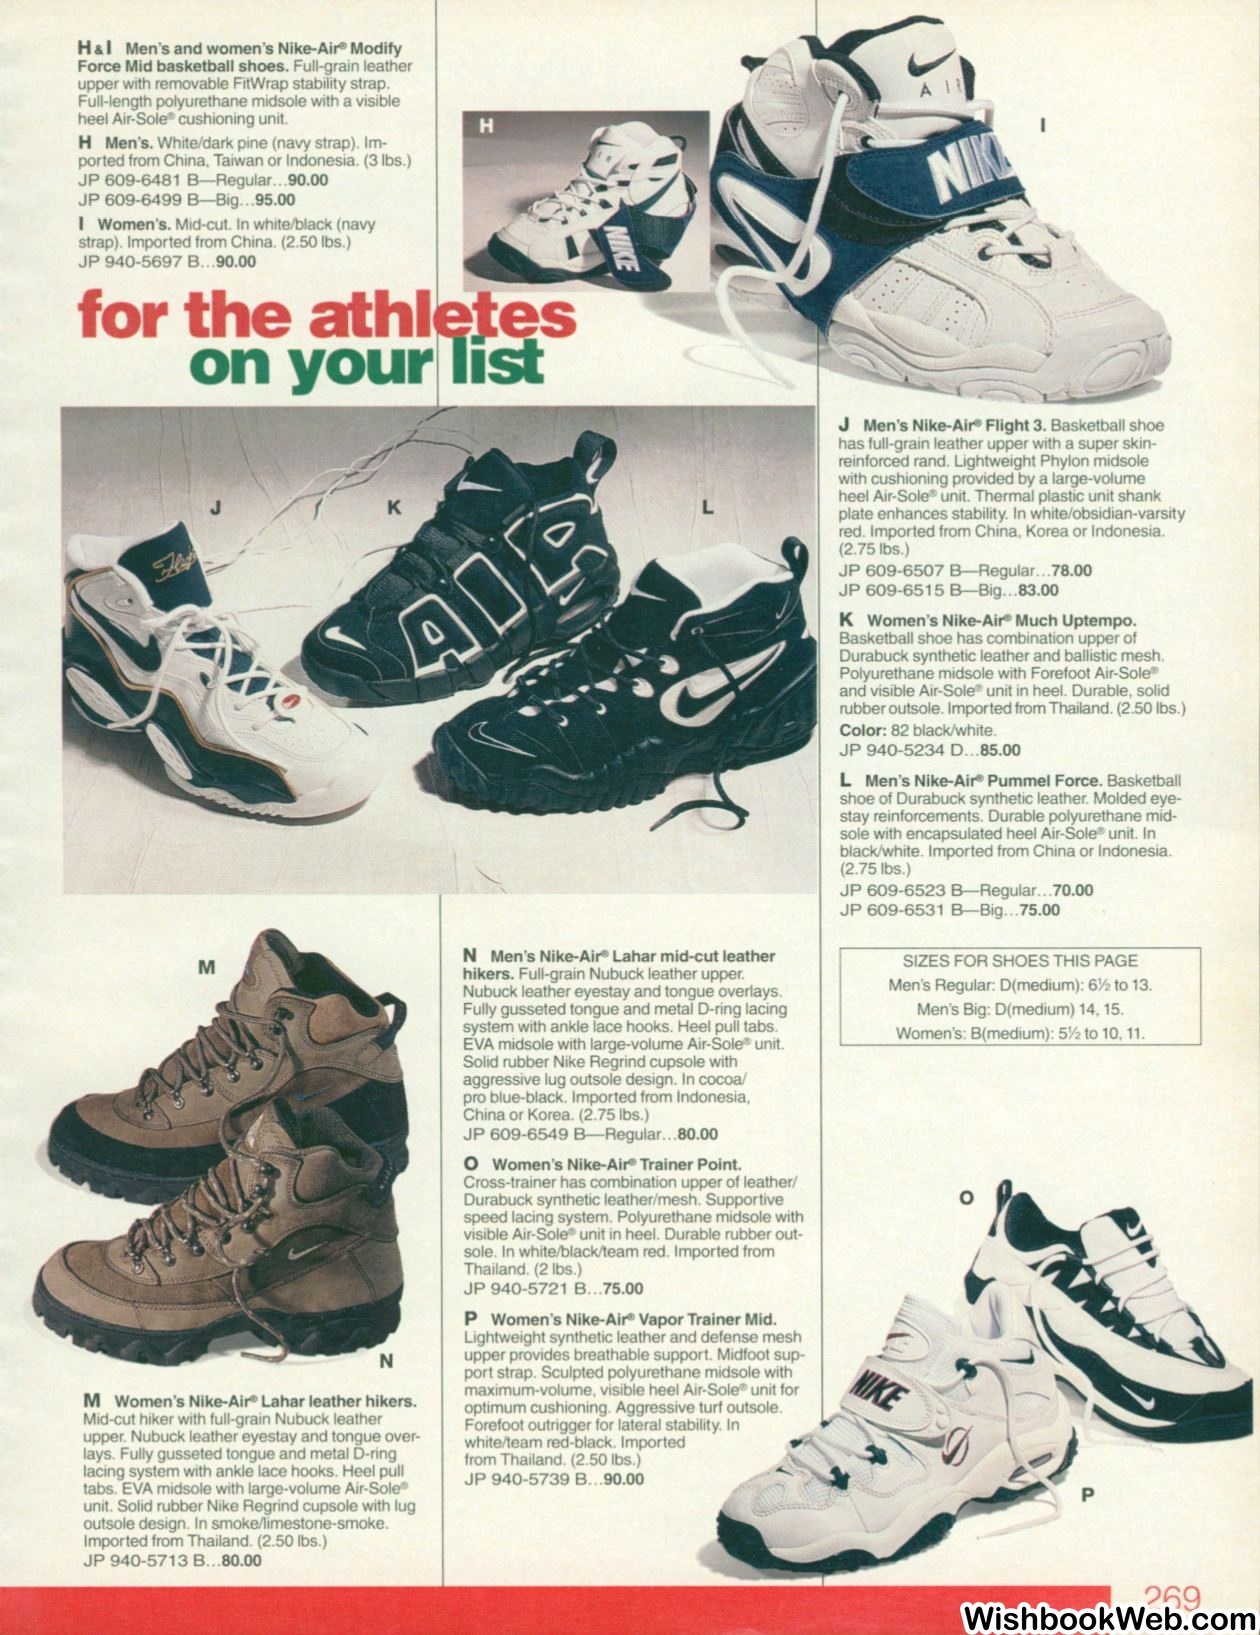 jcpenney womens basketball shoes